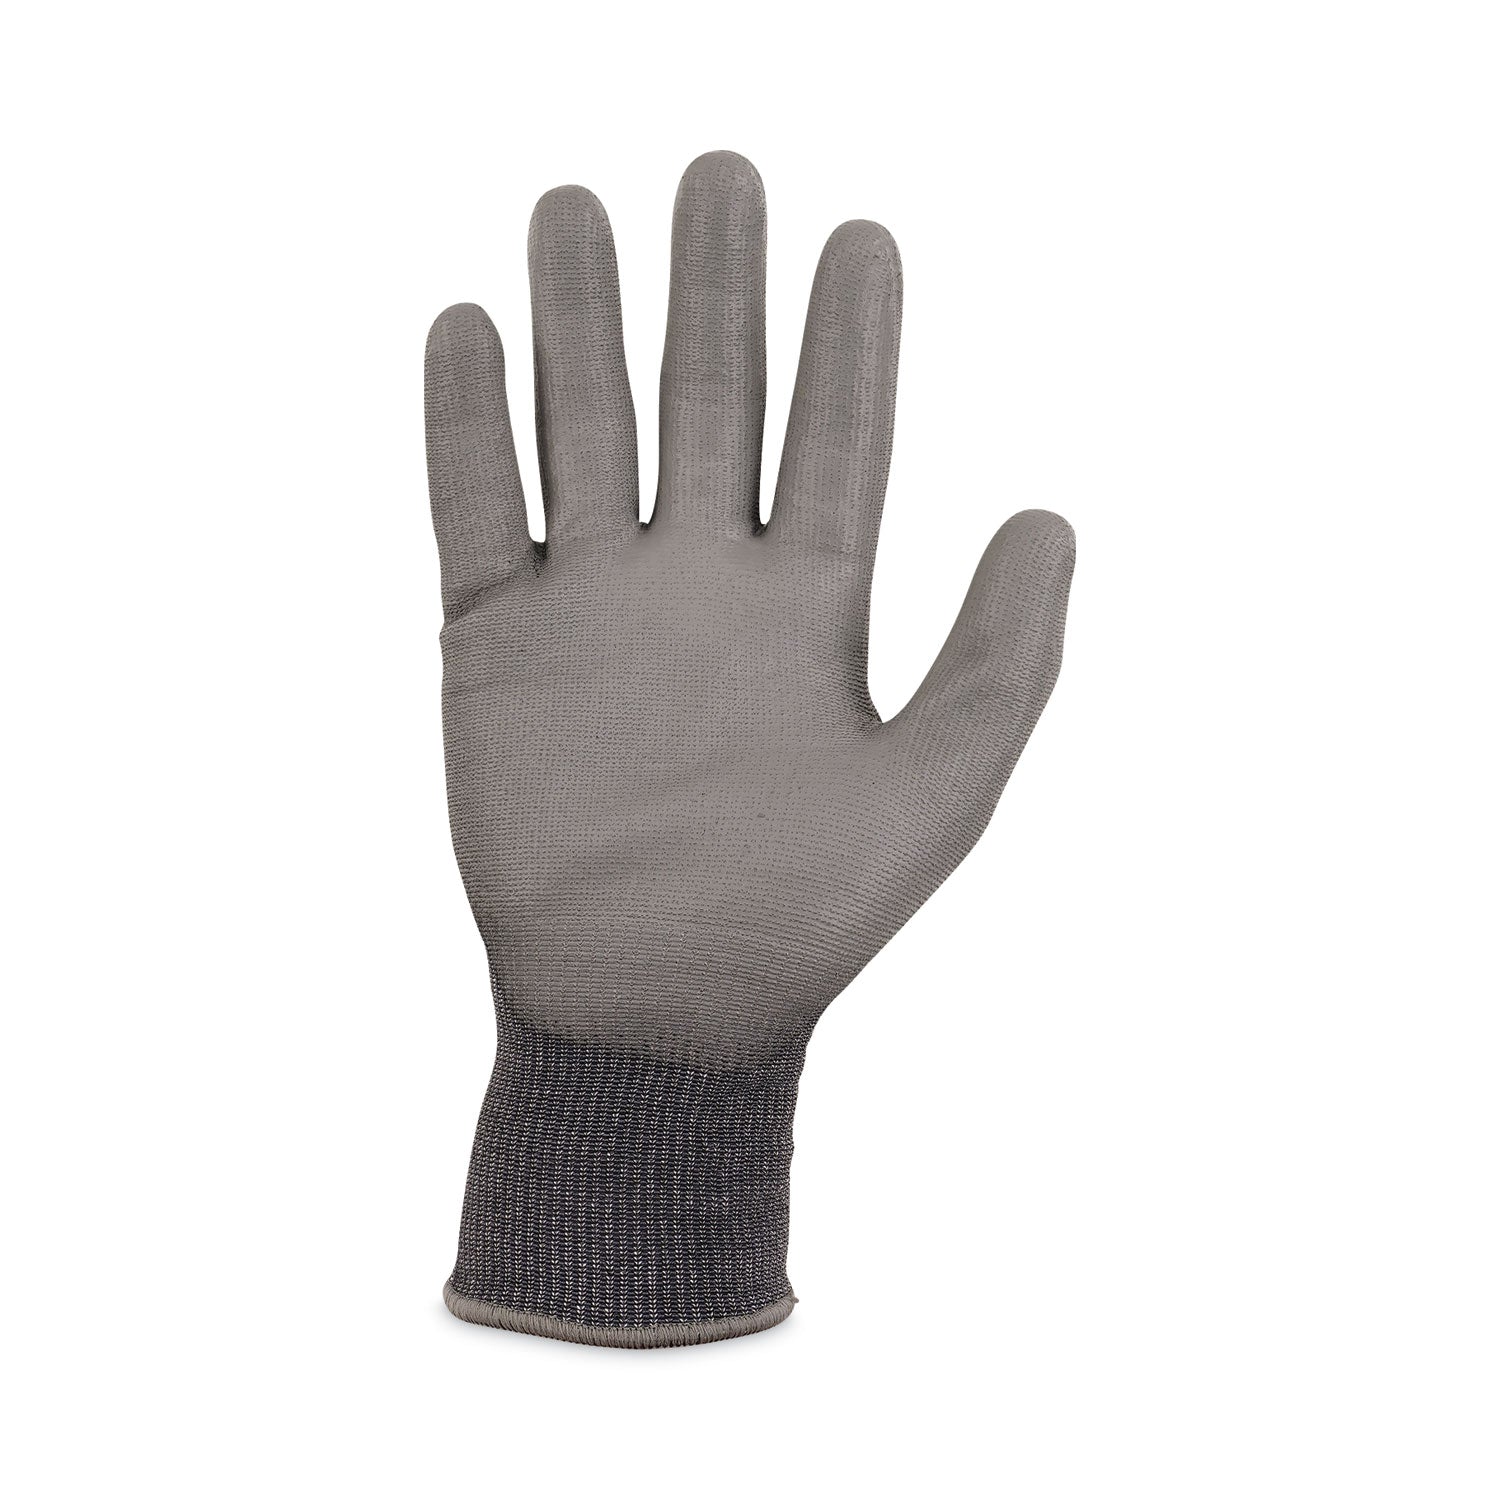 proflex-7044-ansi-a4-pu-coated-cr-gloves-gray-2x-large-12-pairs-pack-ships-in-1-3-business-days_ego10486 - 2